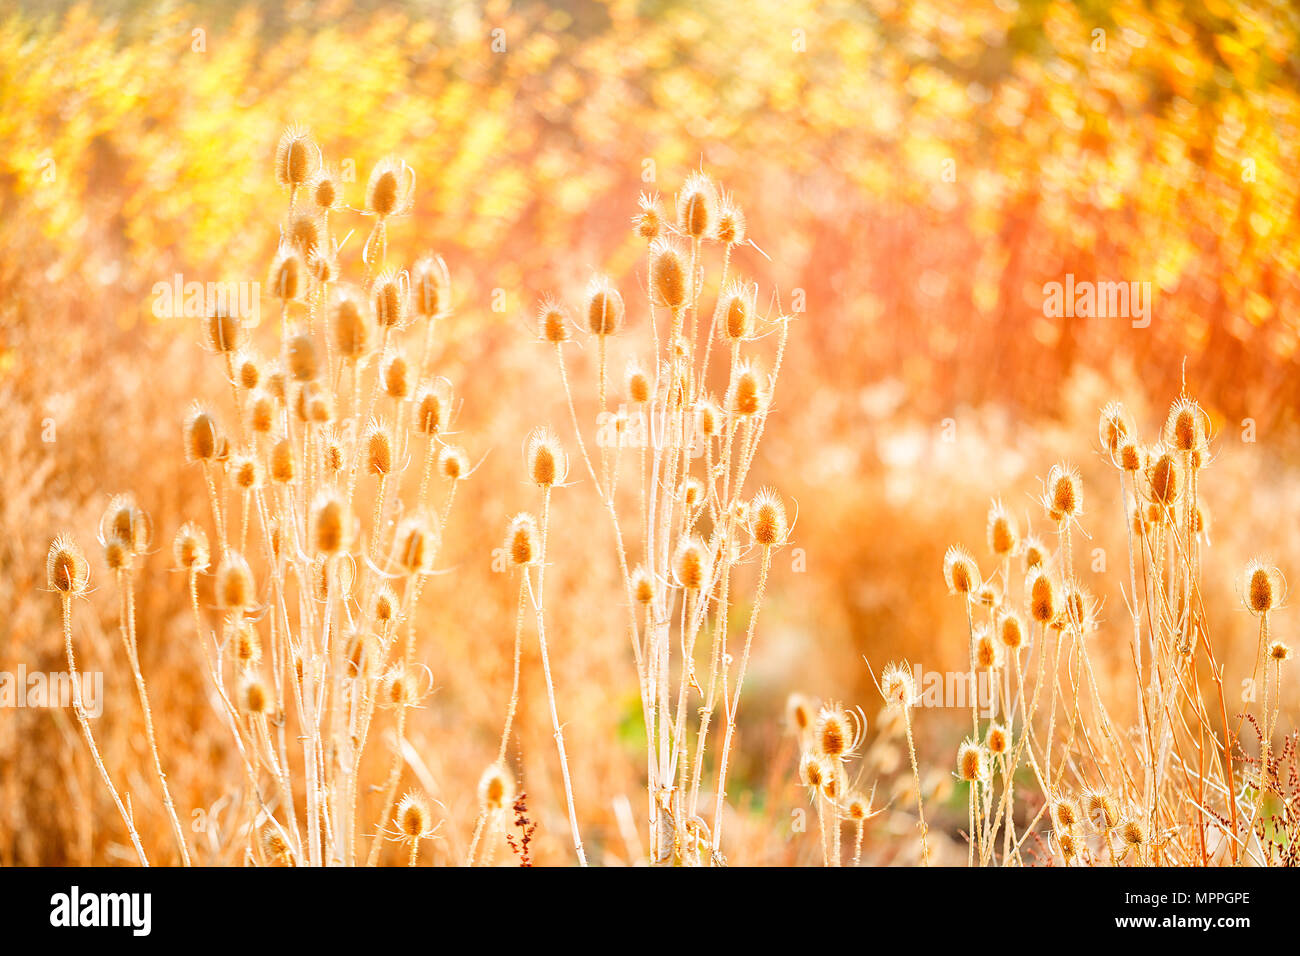 Spain, Wicker cultivation in Canamares in autumn, blurred Stock Photo